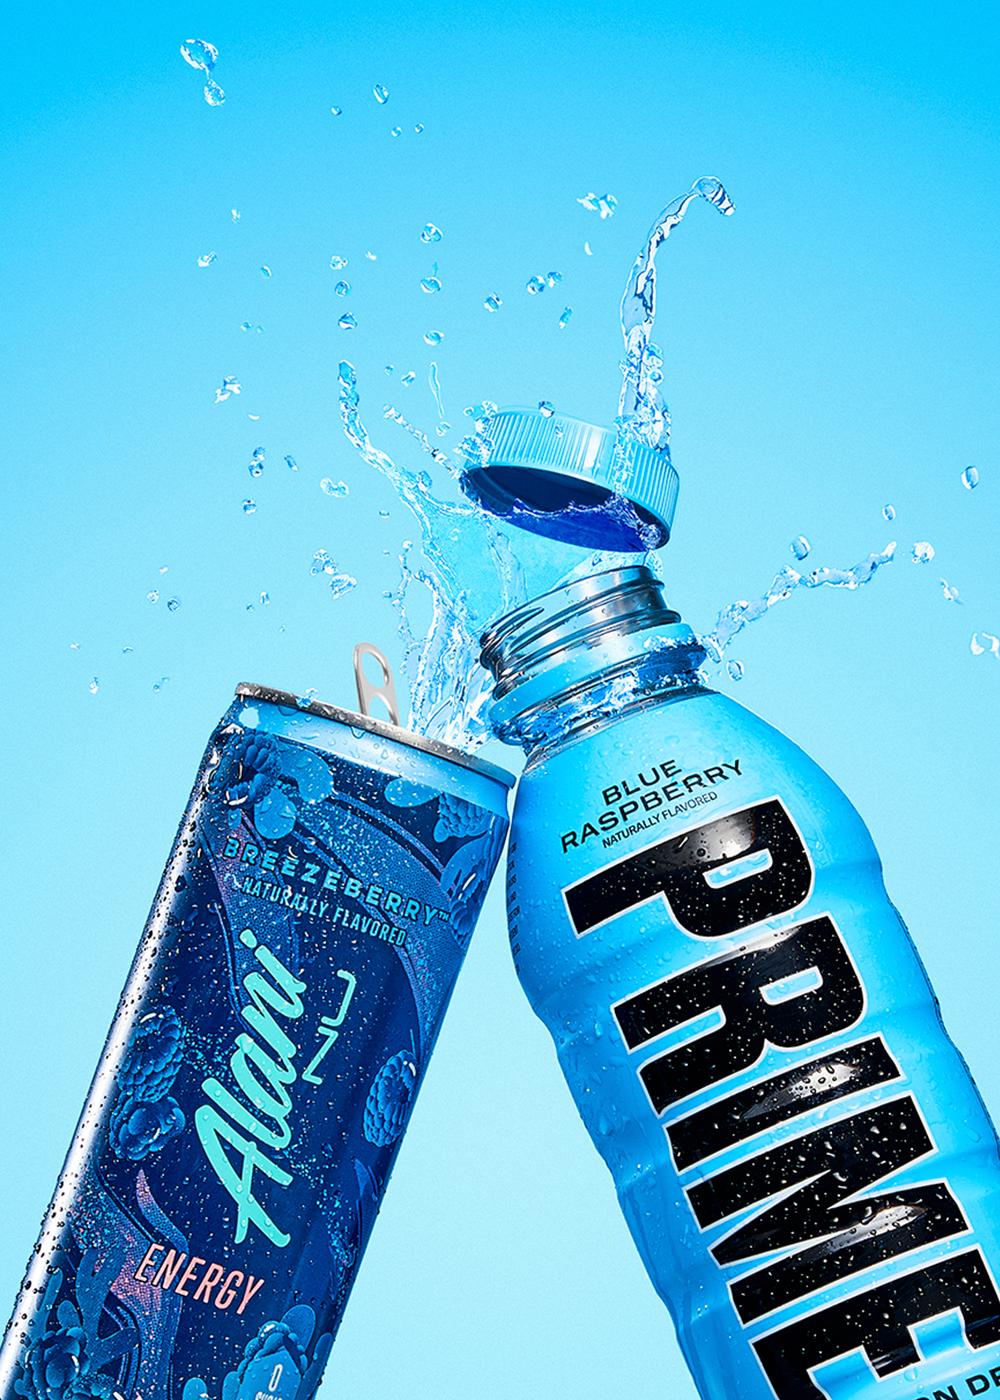 An energy drink in blue raspberry flavor splashing out of an open bottle next to a prime hydration bottle in blue raspberry flavor.